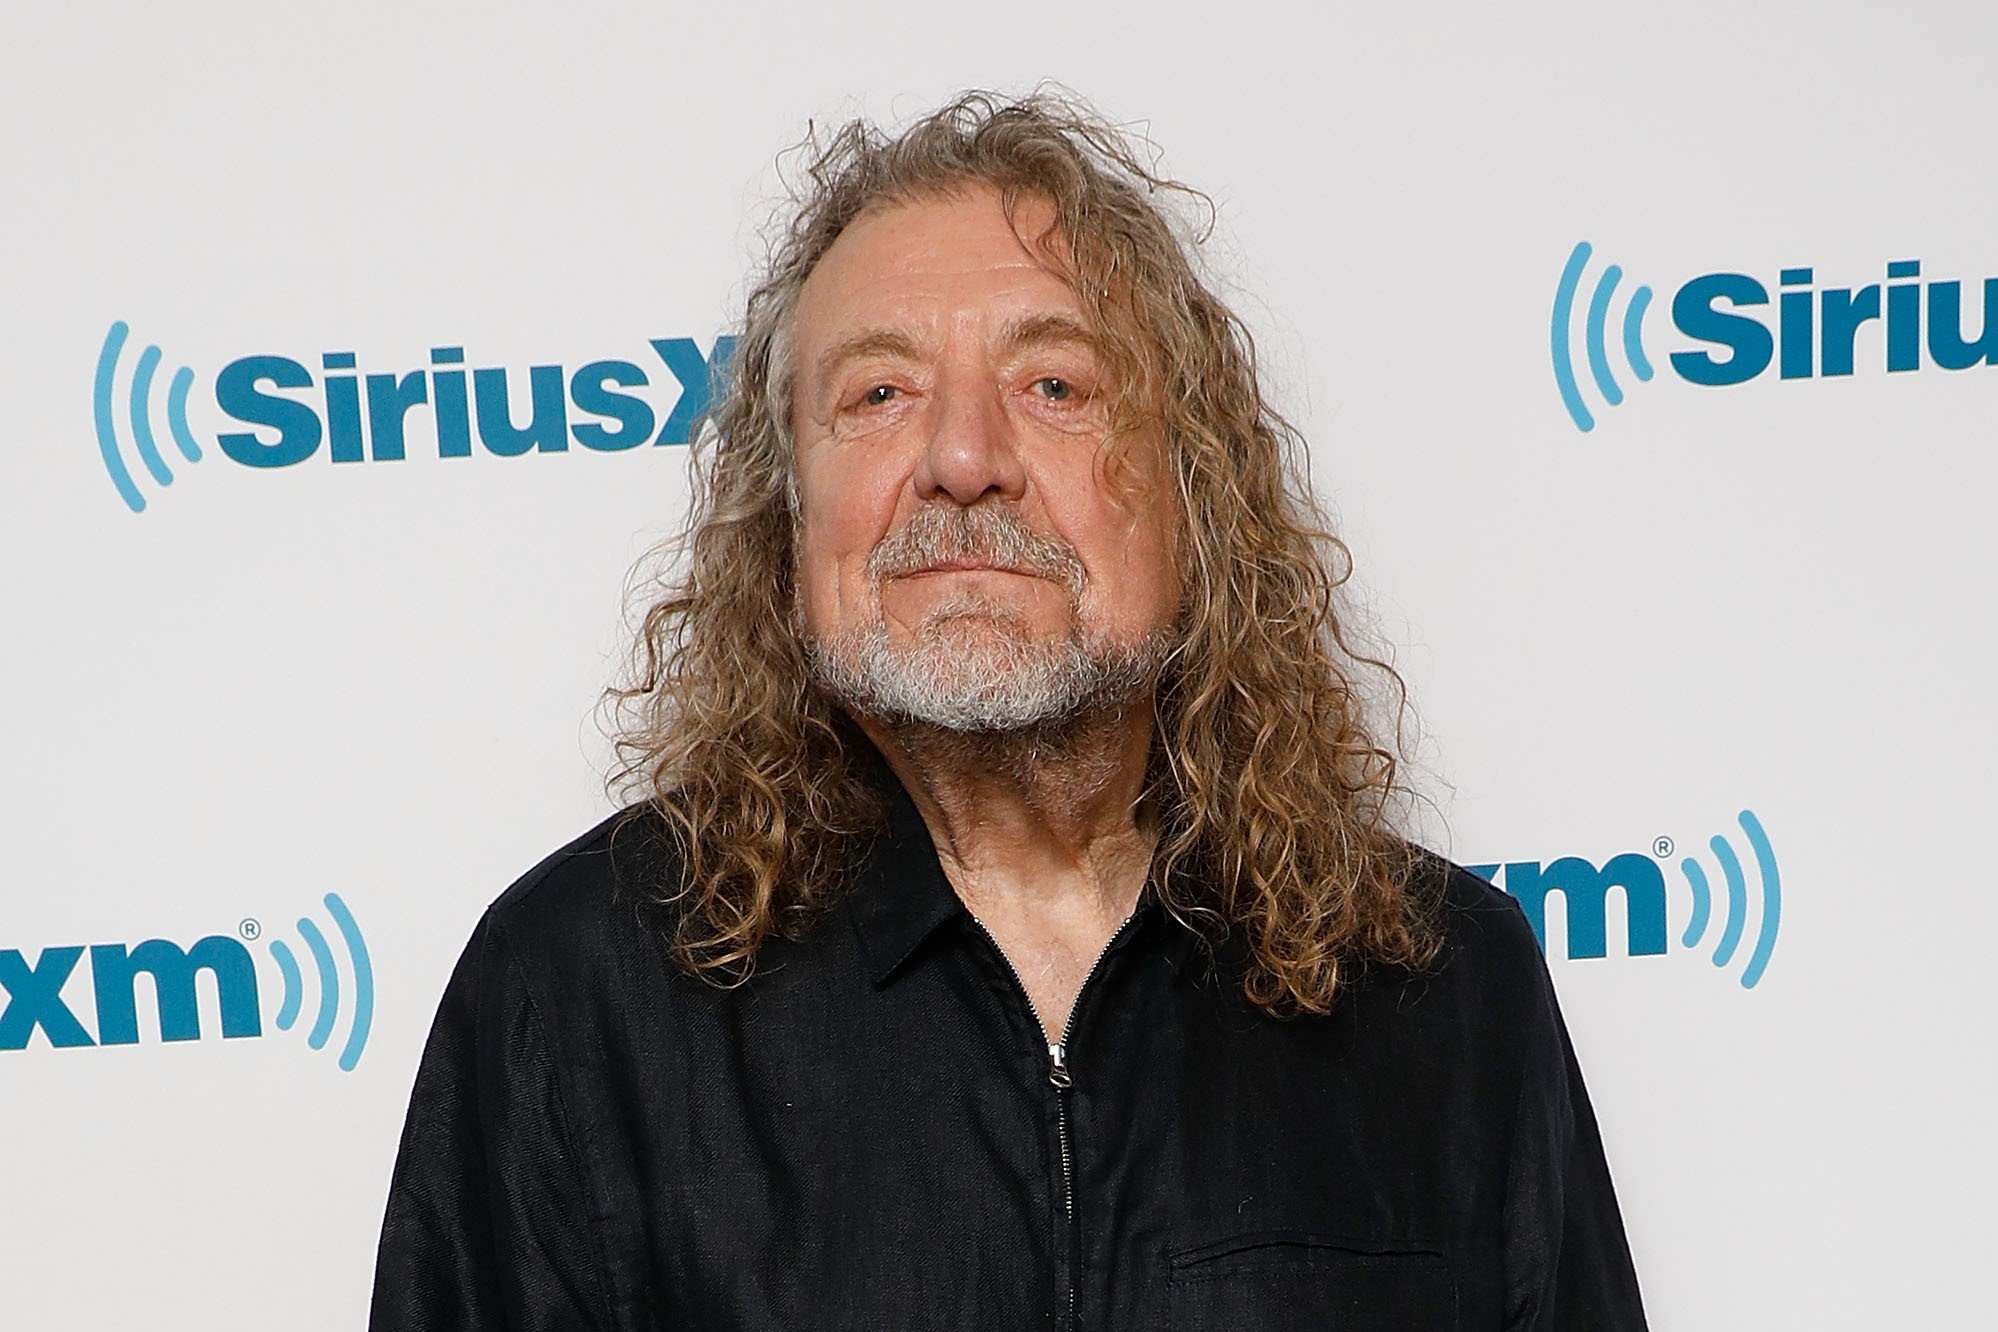 Robert Plant wears black and stands in front of a white background.